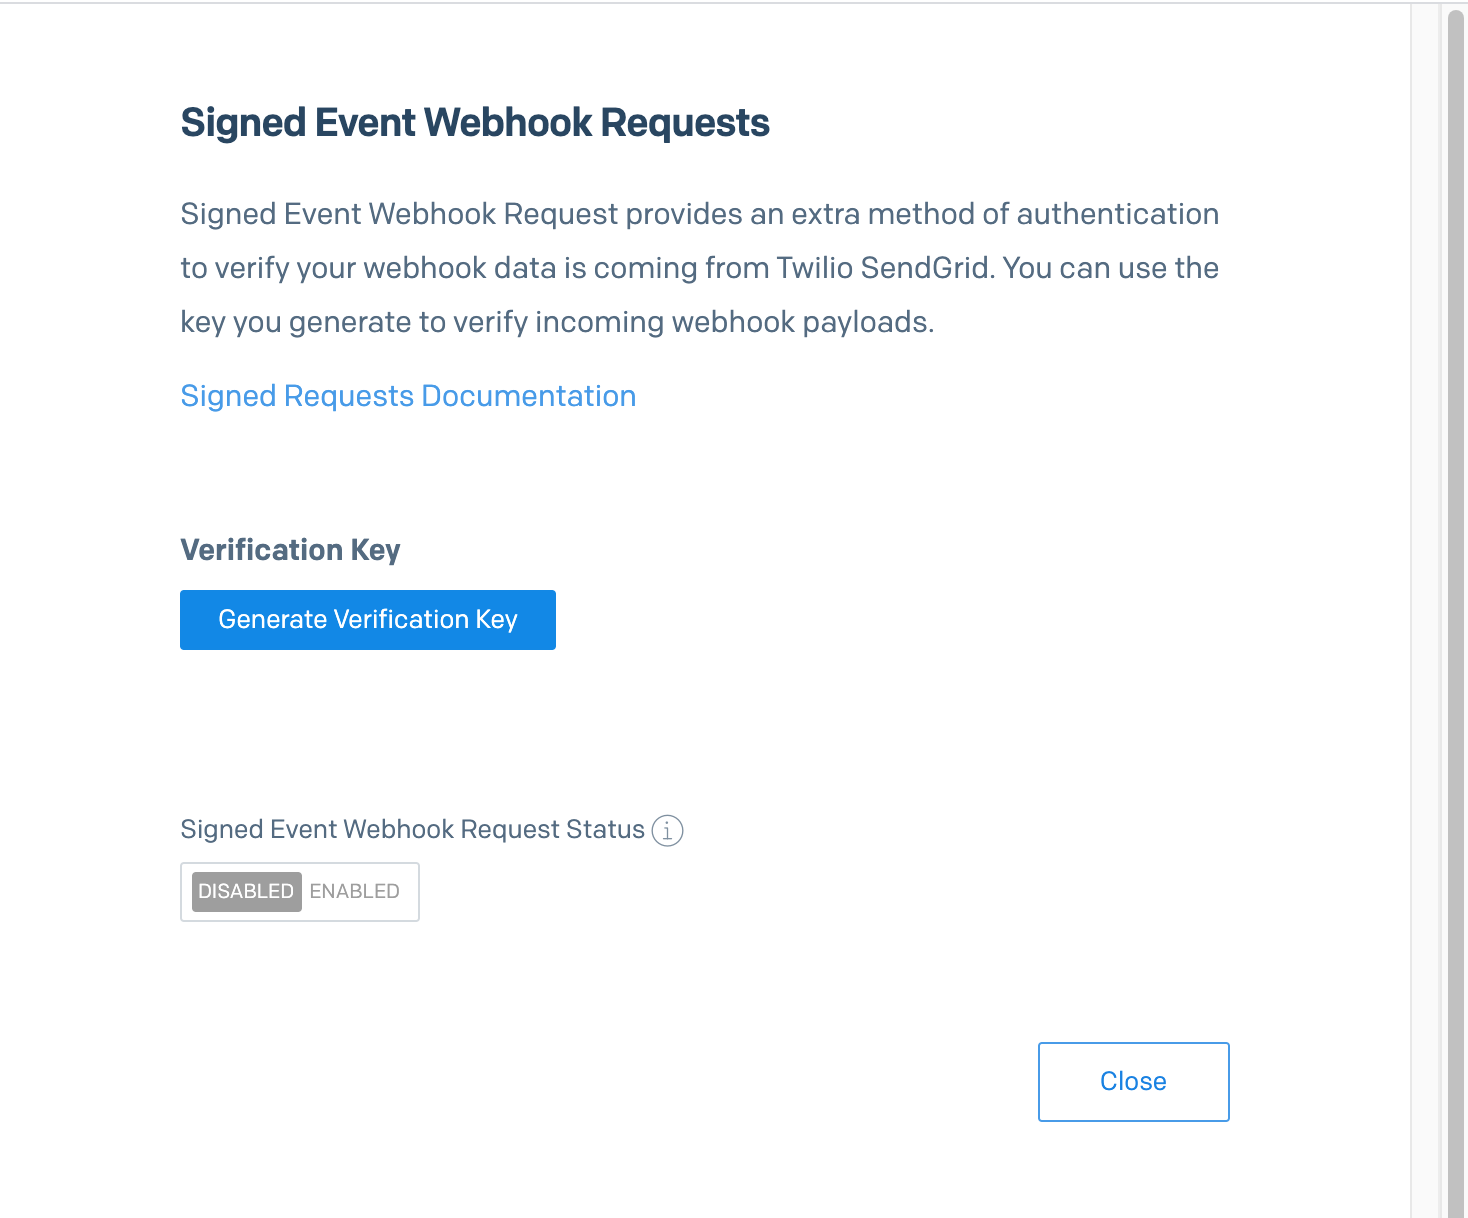 Signed Event Webhook Requests